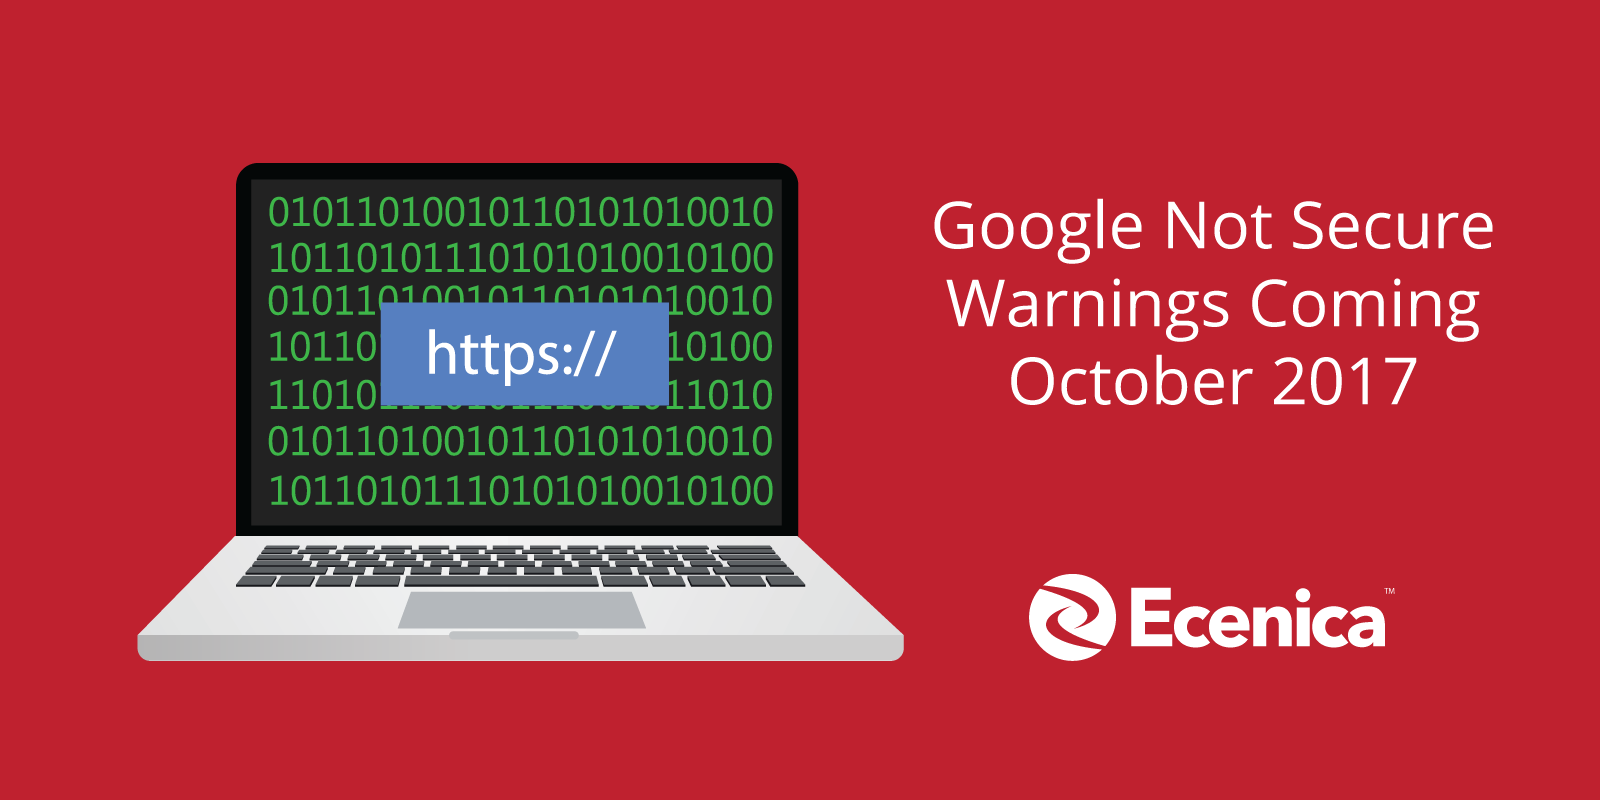 Google Chrome Not Secure Warnings for HTTP websites coming October